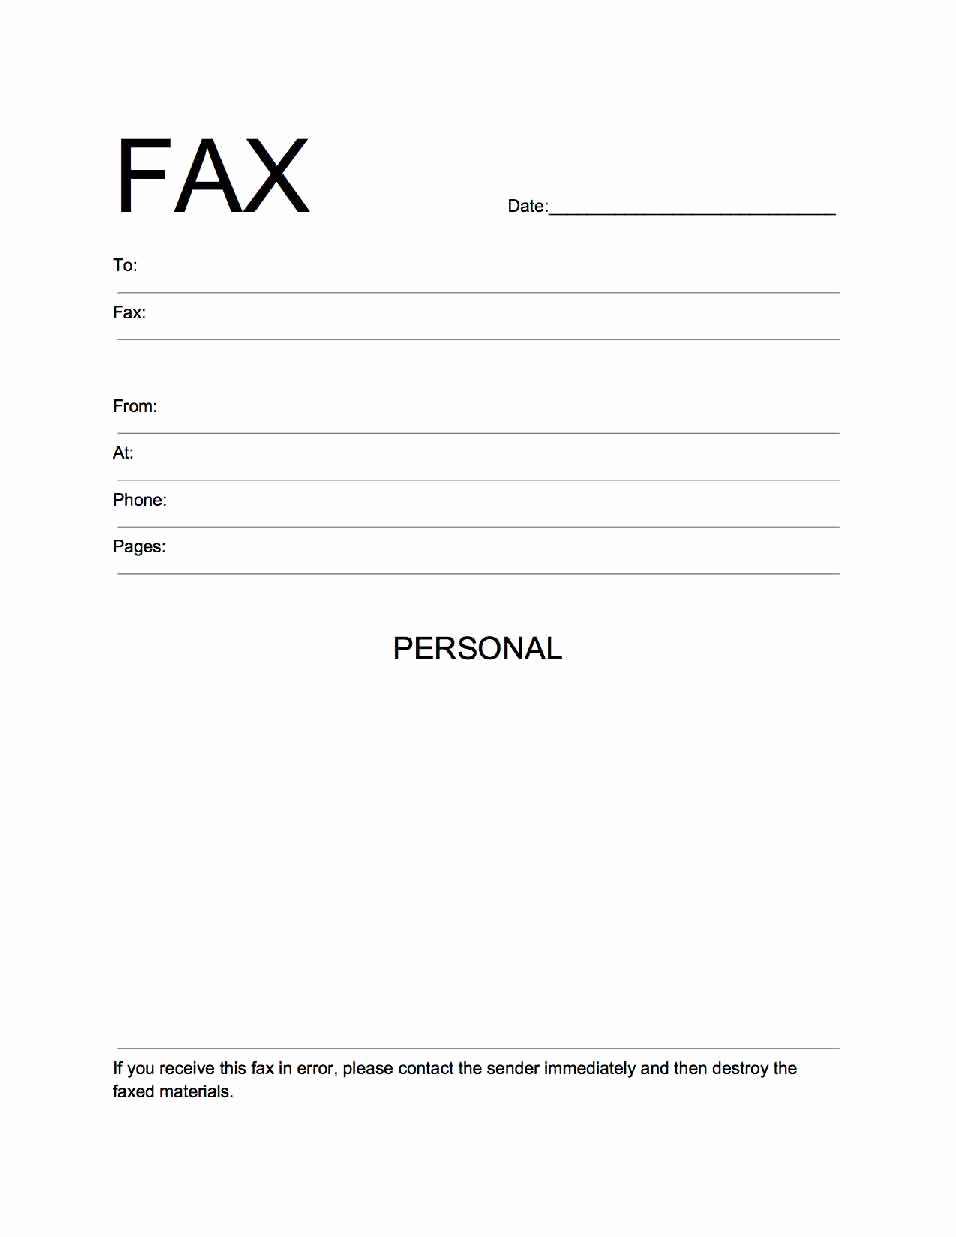 Air force Fax Cover Sheet Best Of Printable Standard Fax Cover Sheet Printable Pages